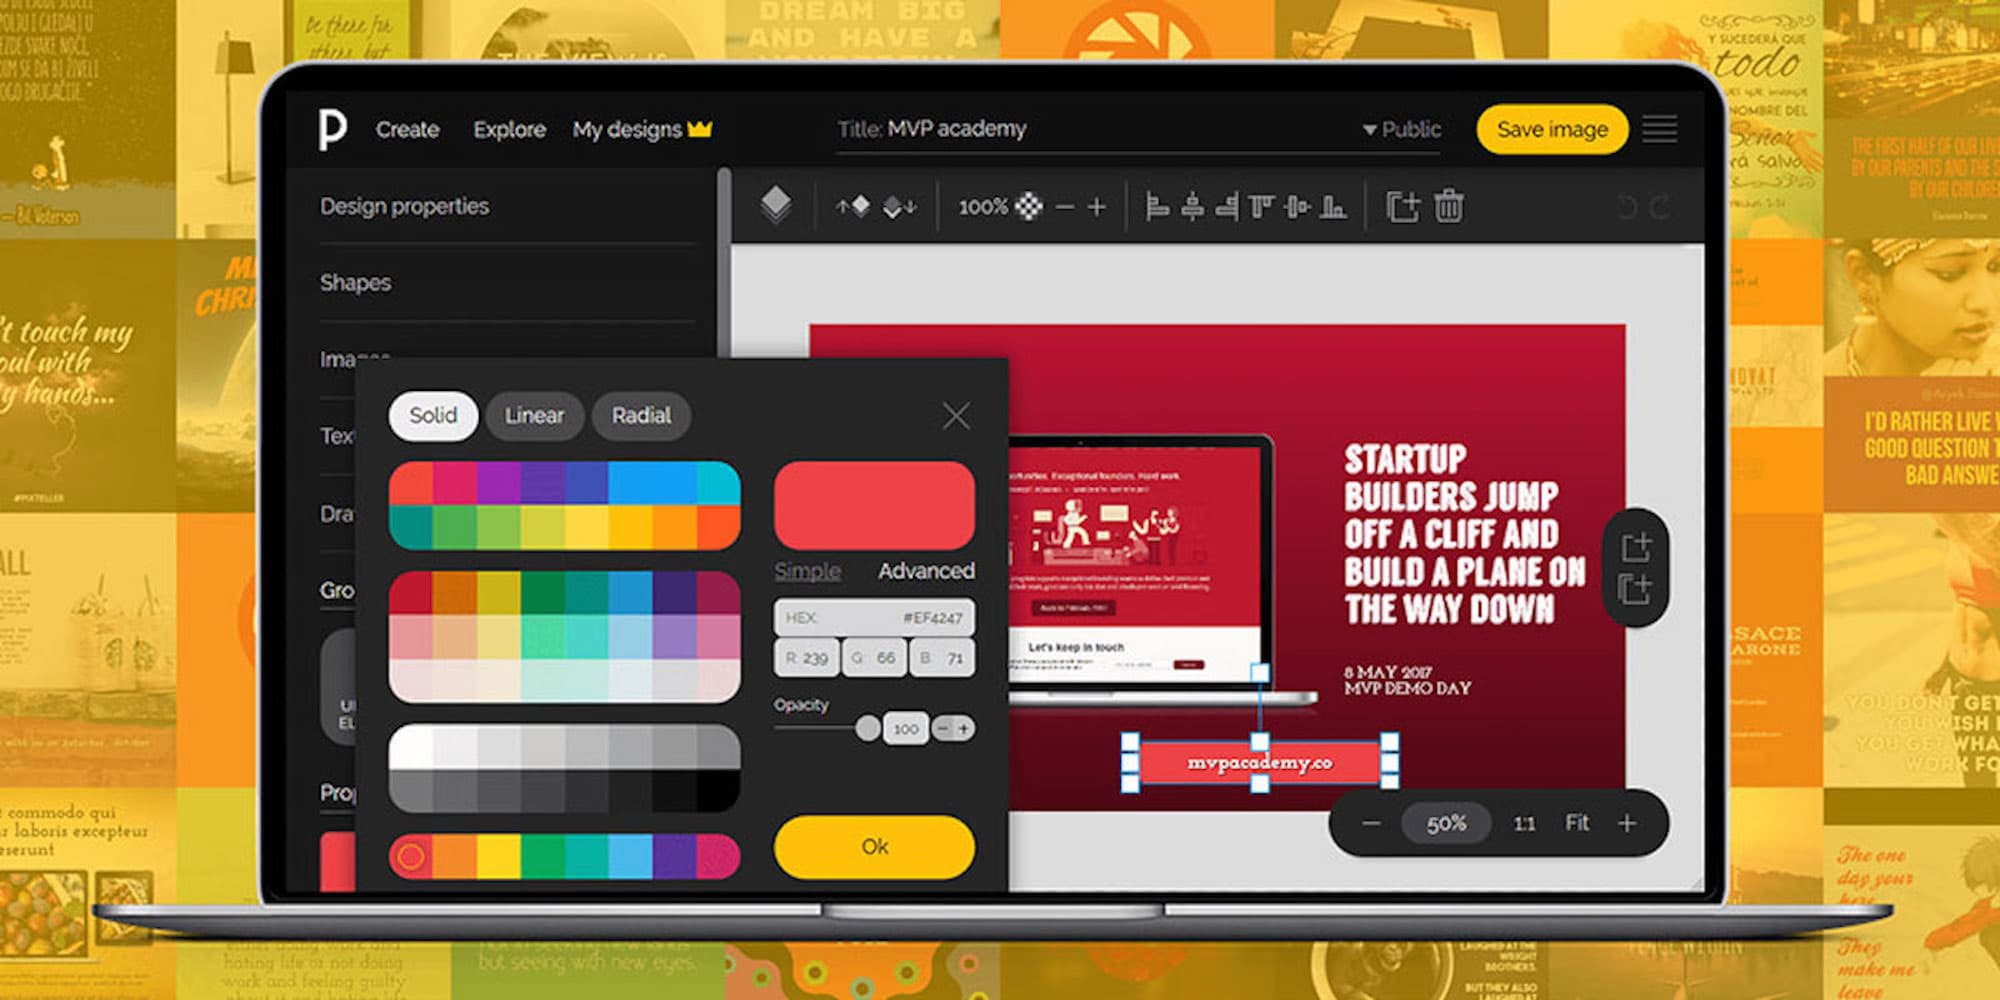 Get all the graphic design tools you need, without breaking the bank.